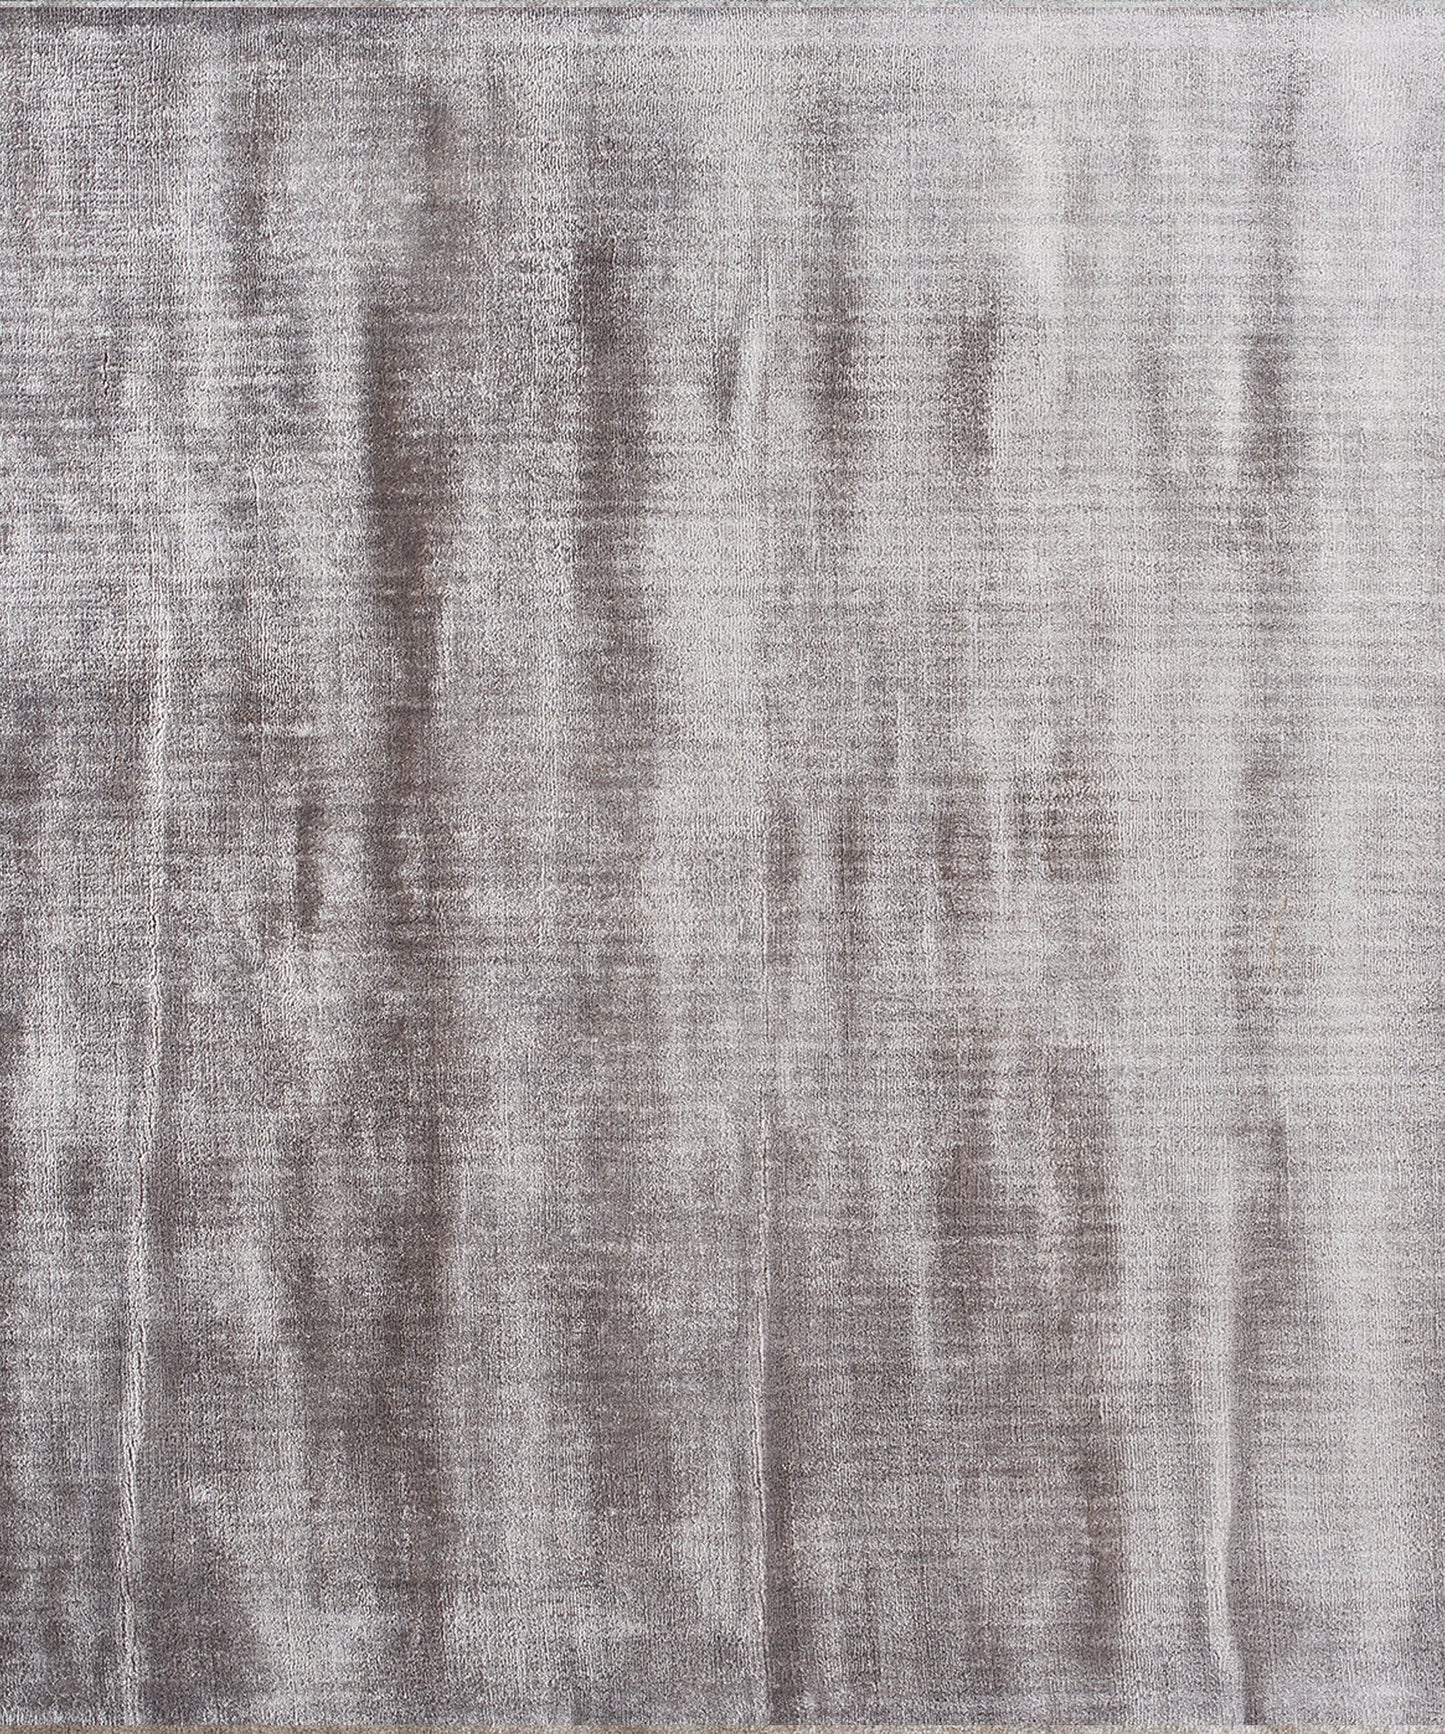 Lucens Rug in Silver